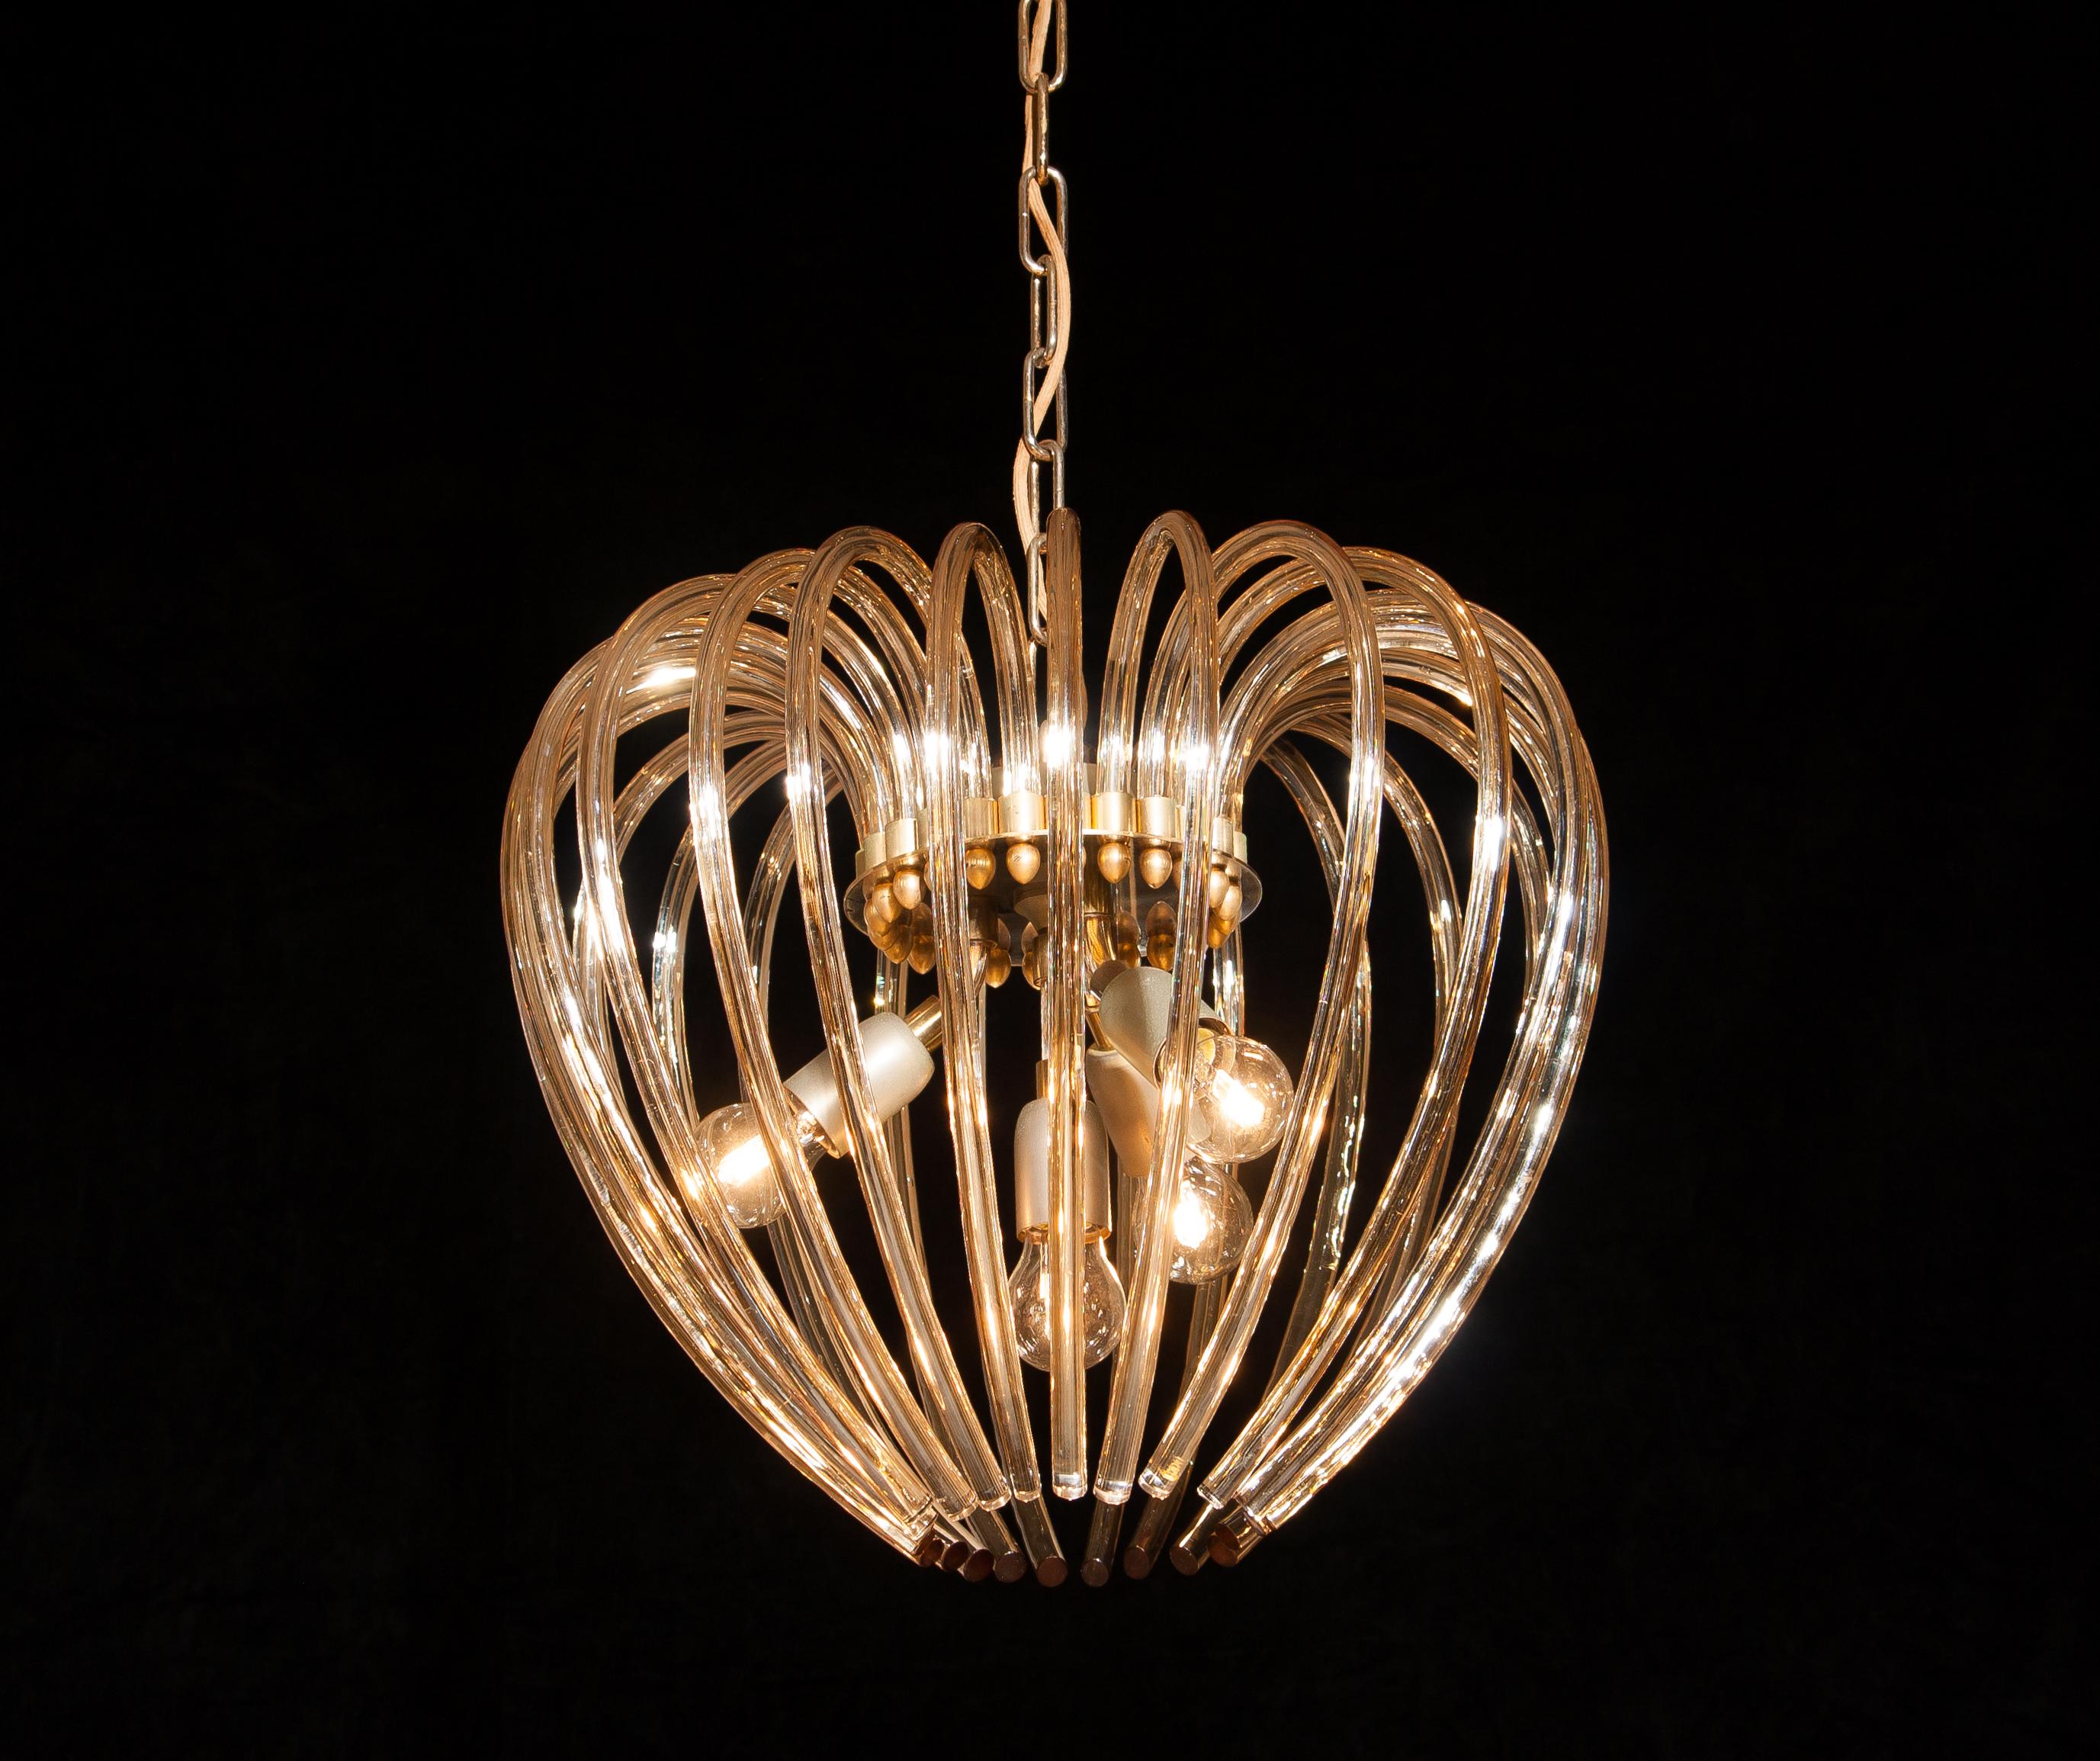 Lovely chandelier by Murano, Italy.
This lamp has a beautiful heart shape made of gilded crystal elements.
It is in excellent condition.
Period 1960s.
Dimension: Total height 90cm, ø 50 cm.